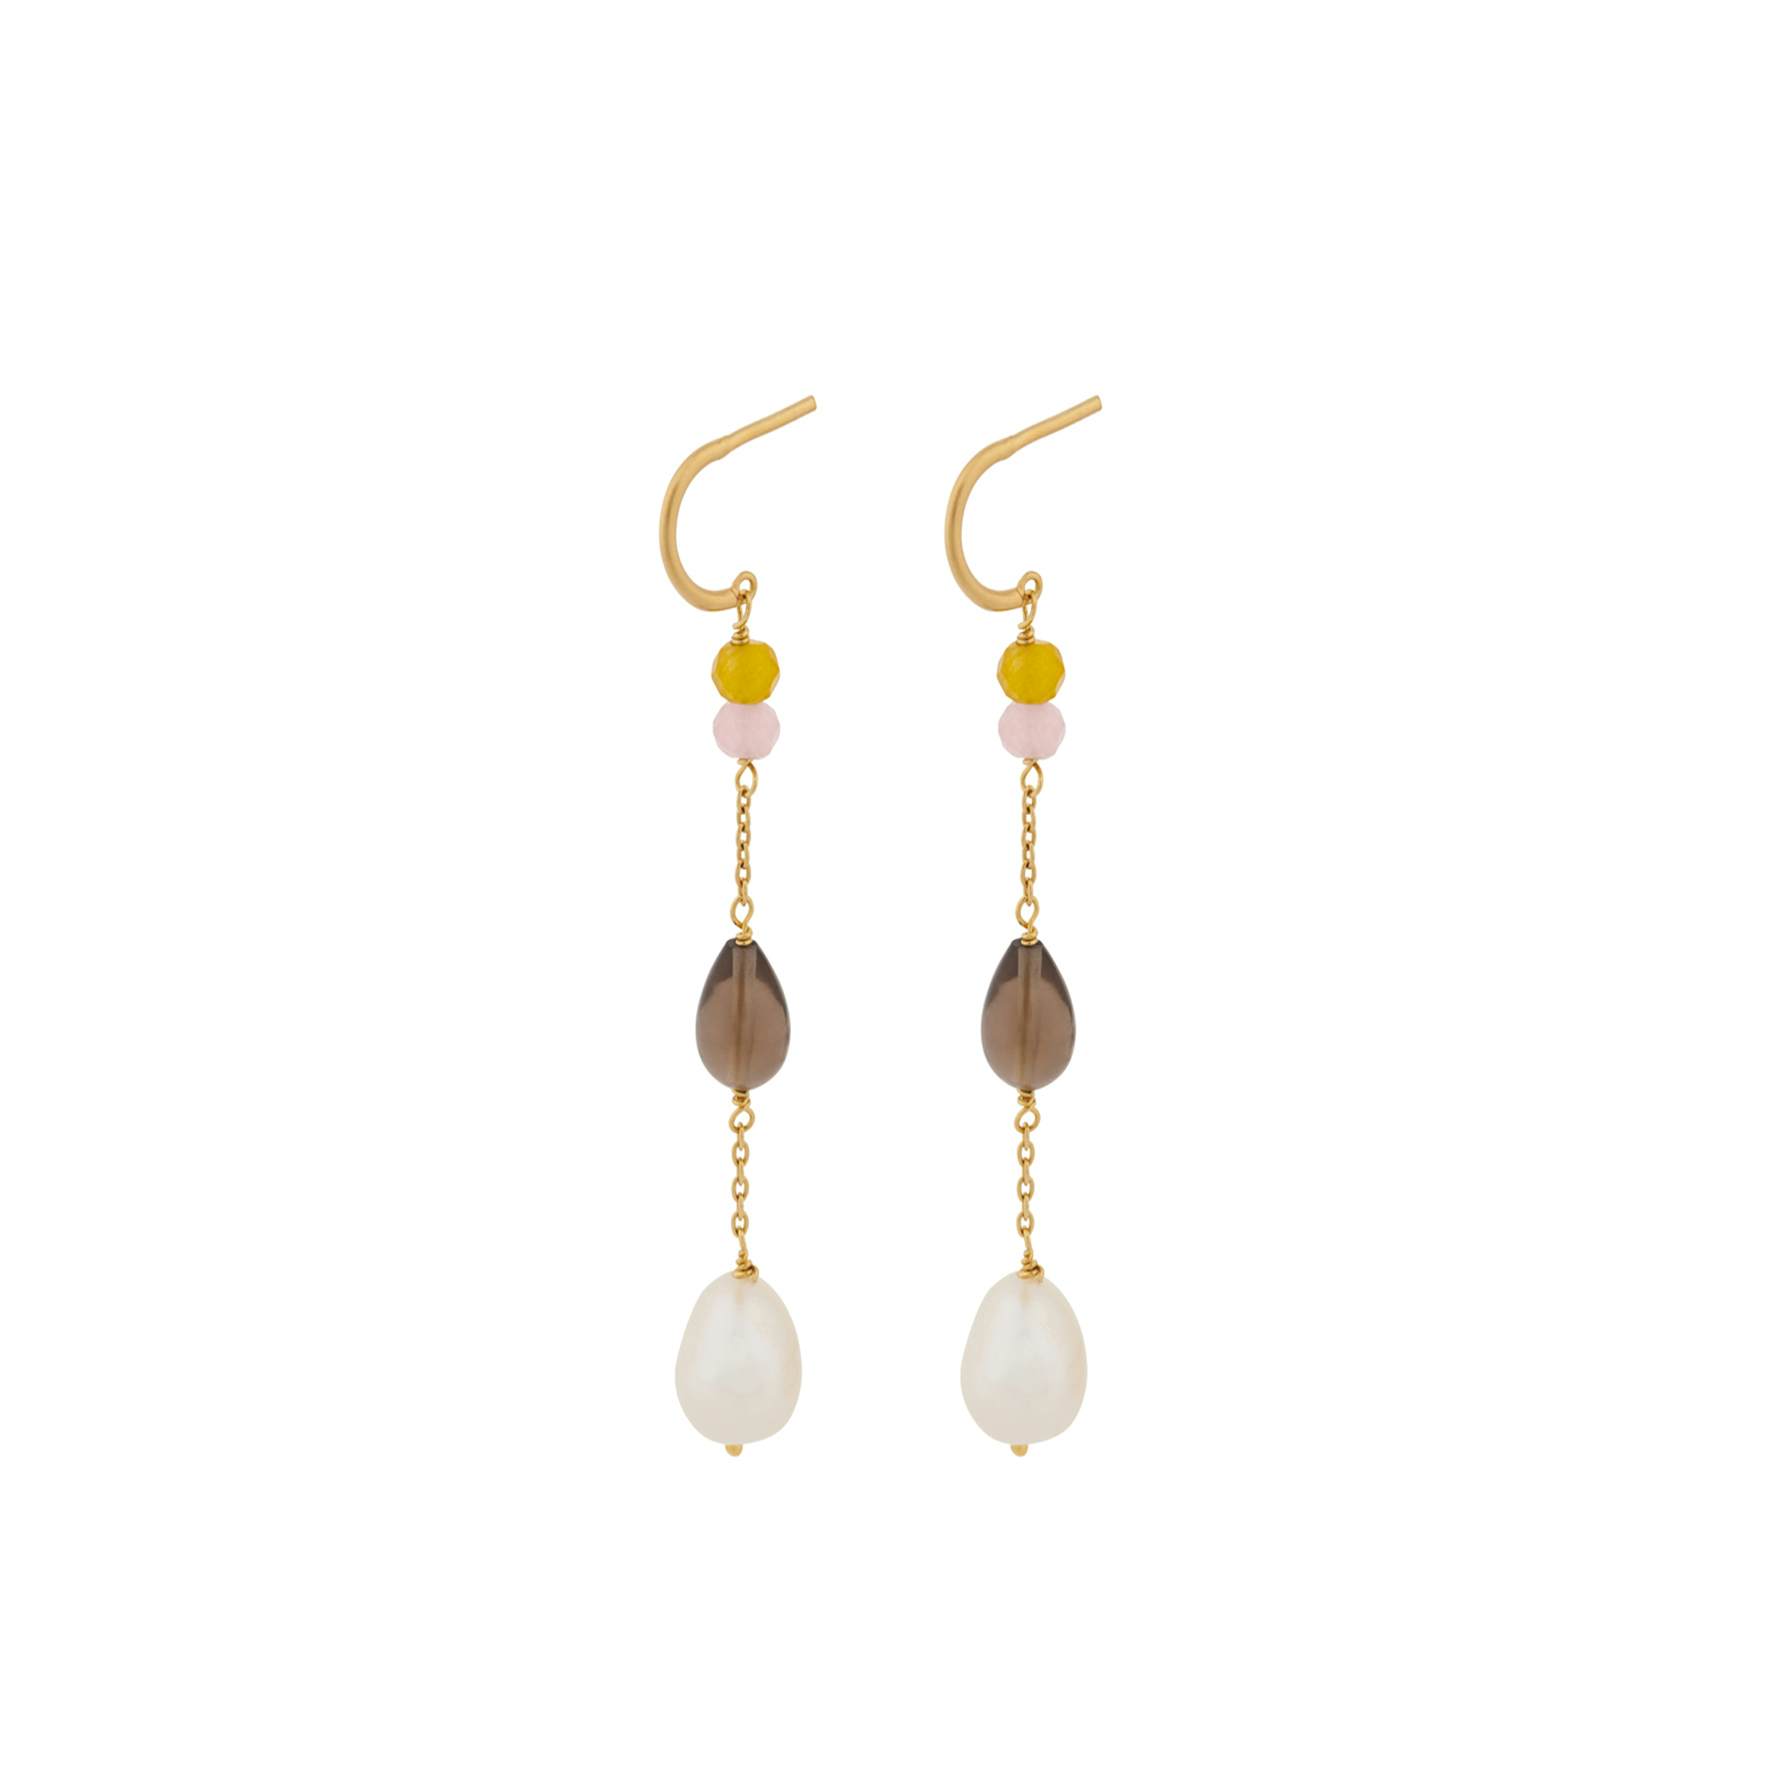 Lagoon Shade Earrings from Pernille Corydon in Goldplated-Silver Sterling 925